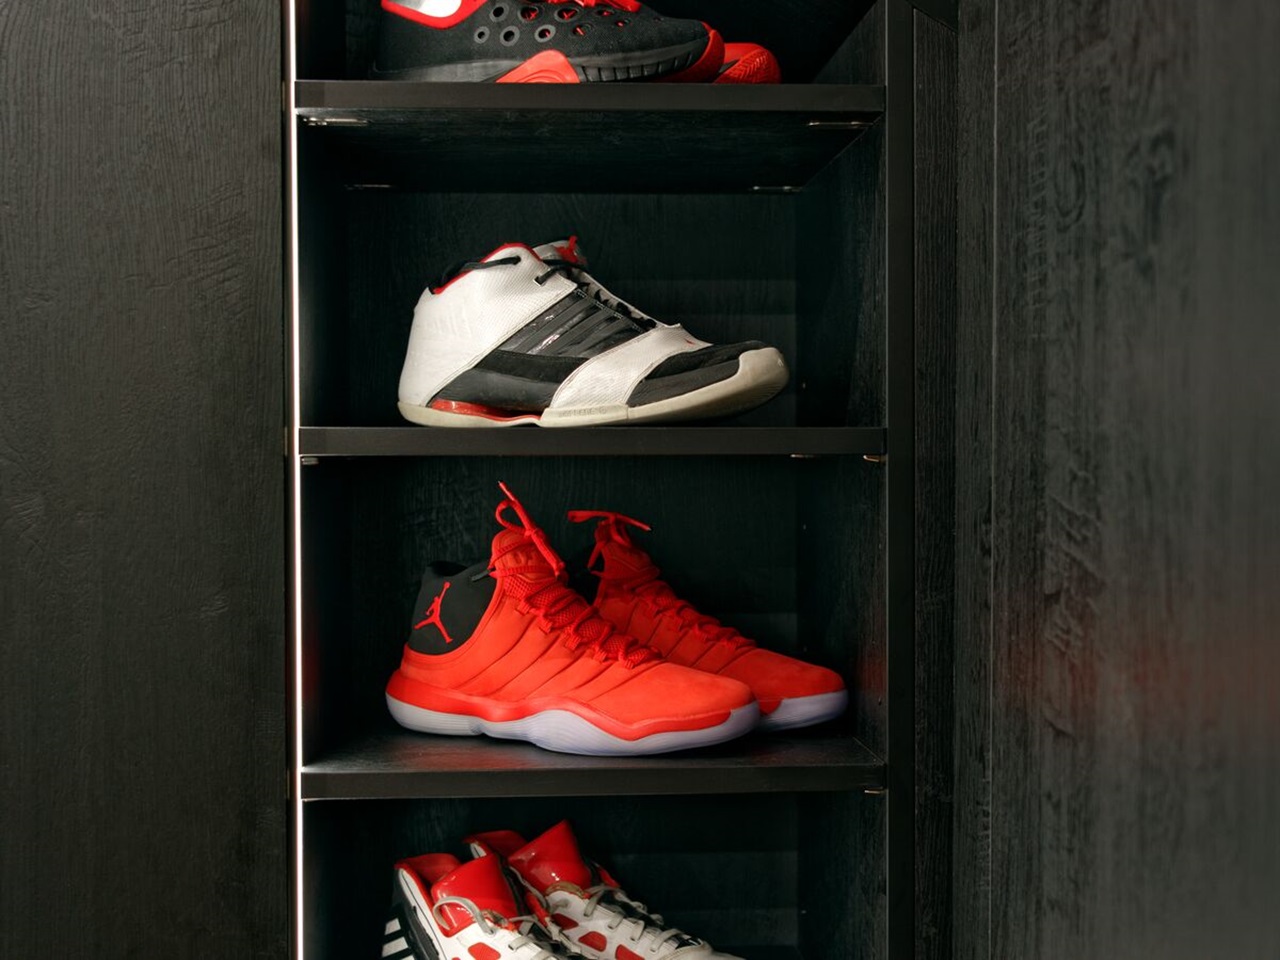 Made-to-measure shoe shelves for the basketball collector